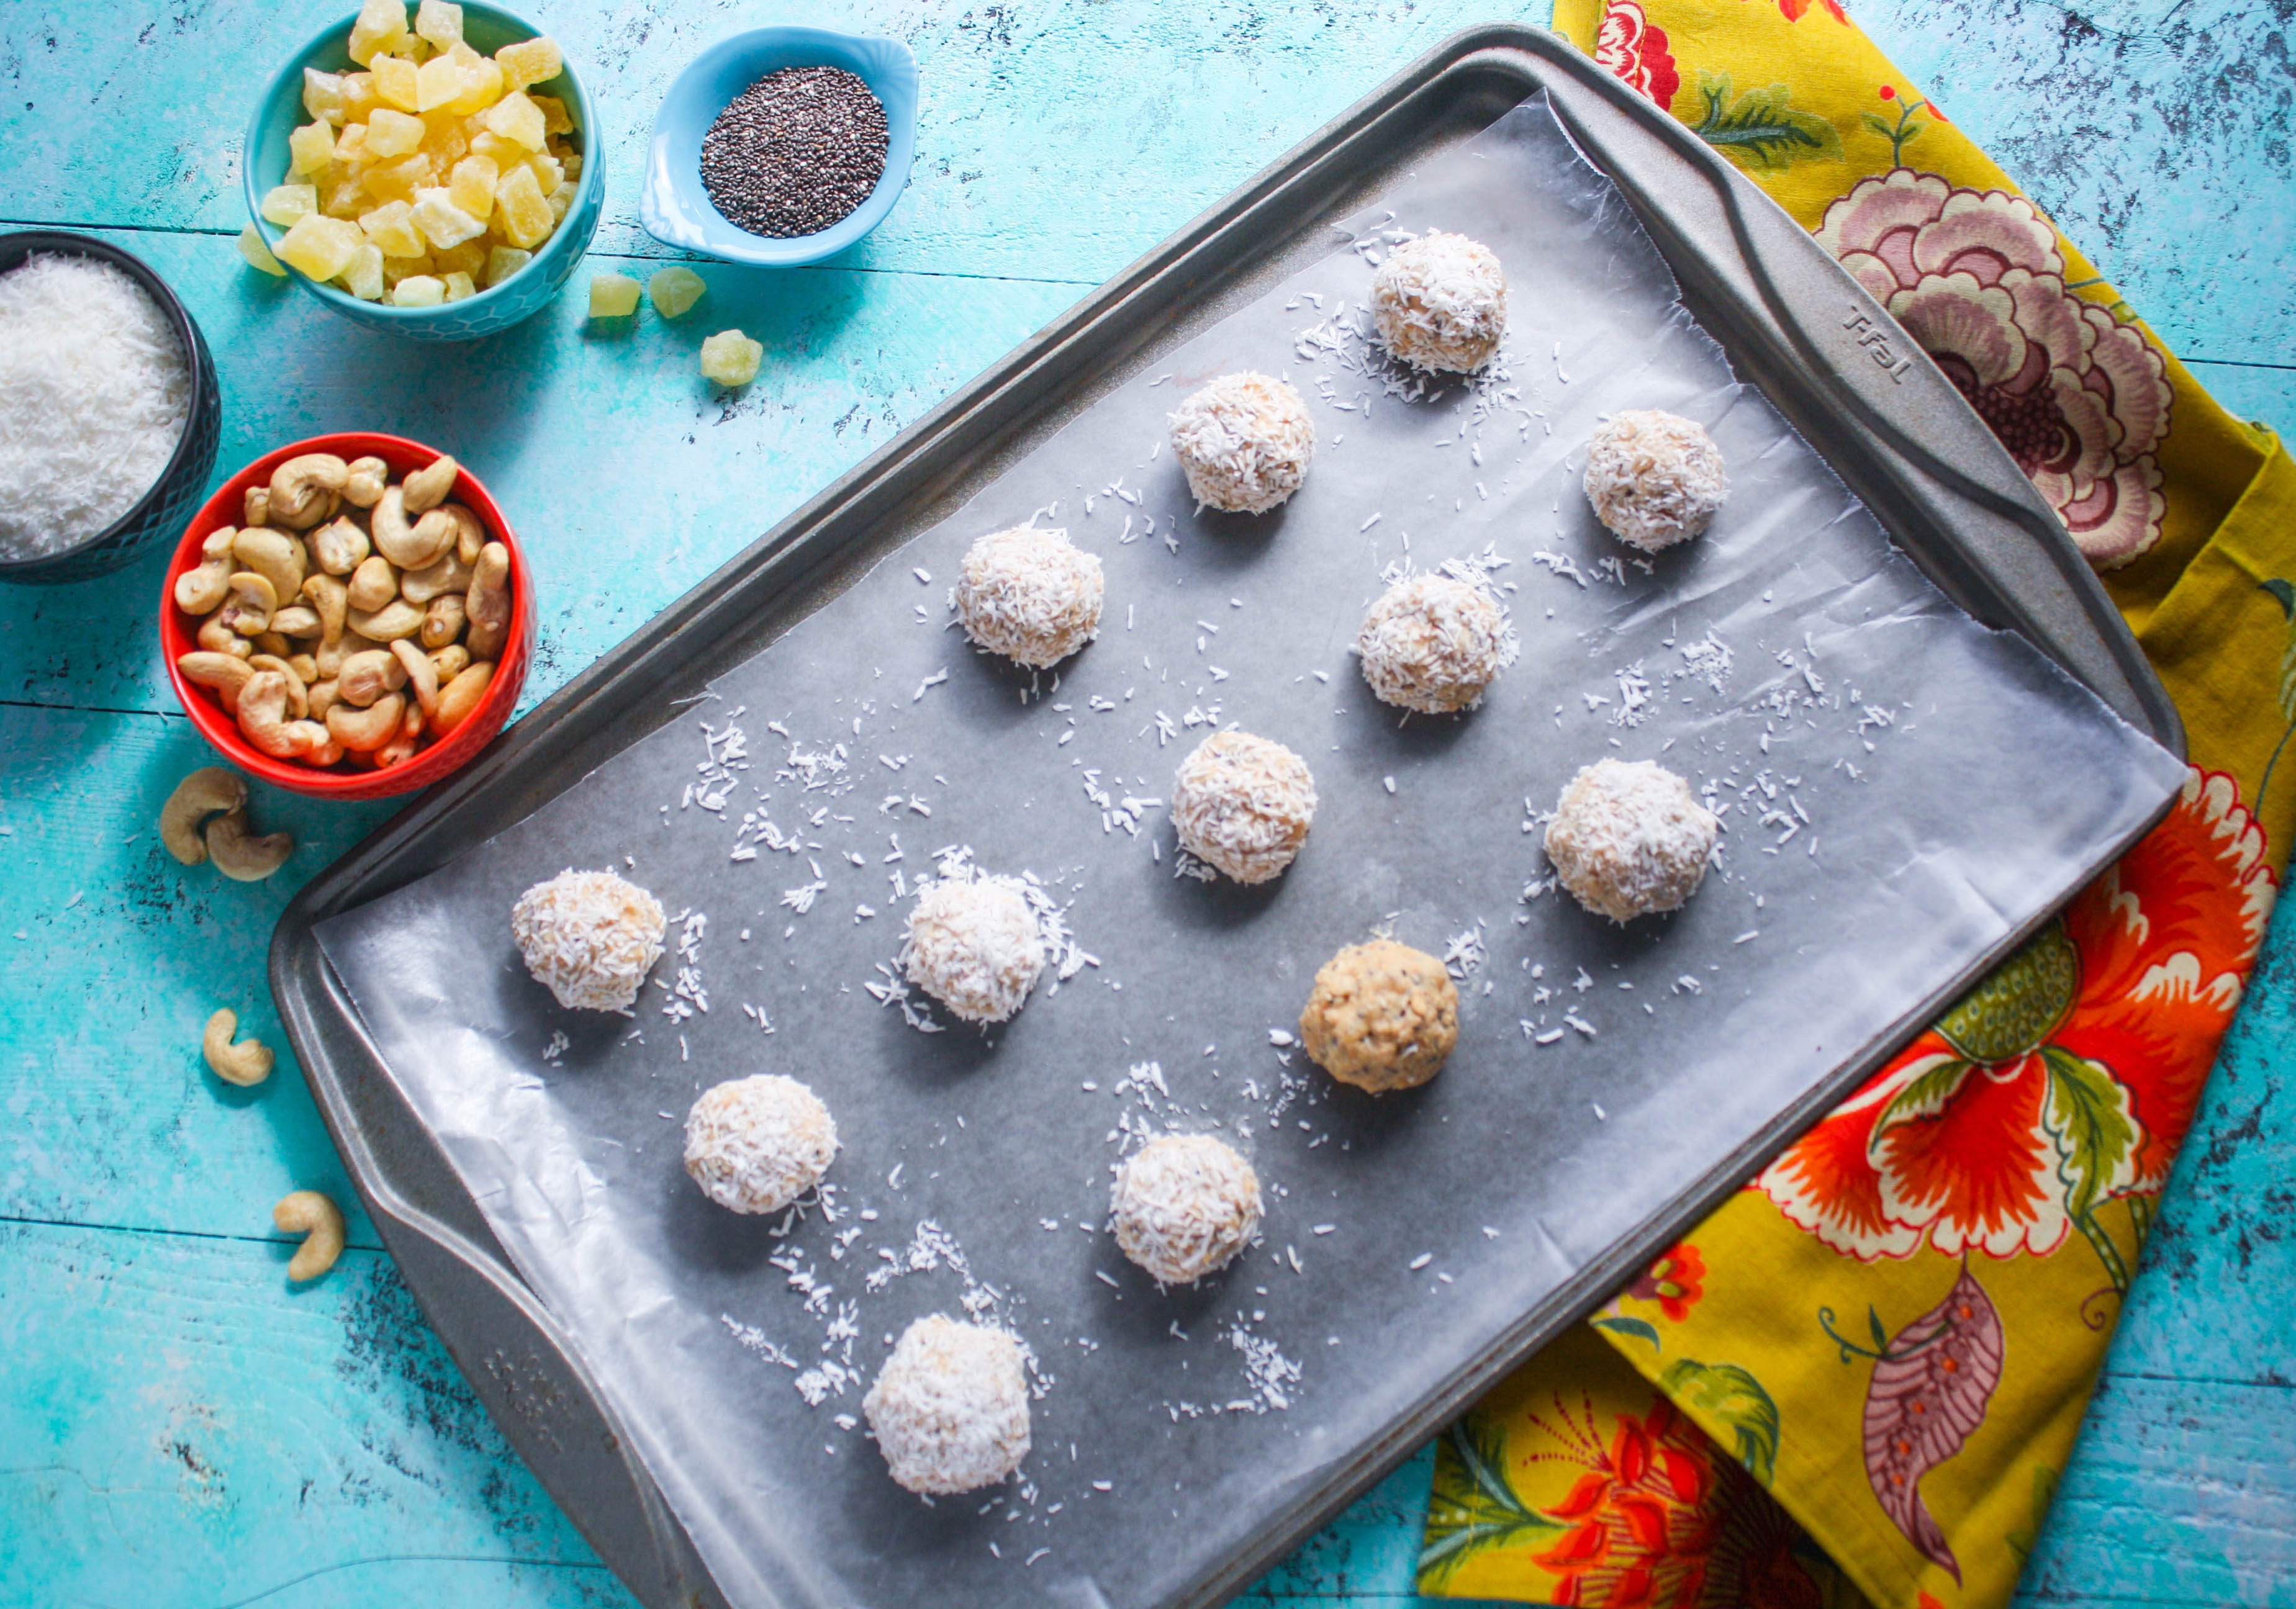 No bake coconut, cashew, and pineapple energy bites make a fabulous snack! These no bake bites are a real treat!